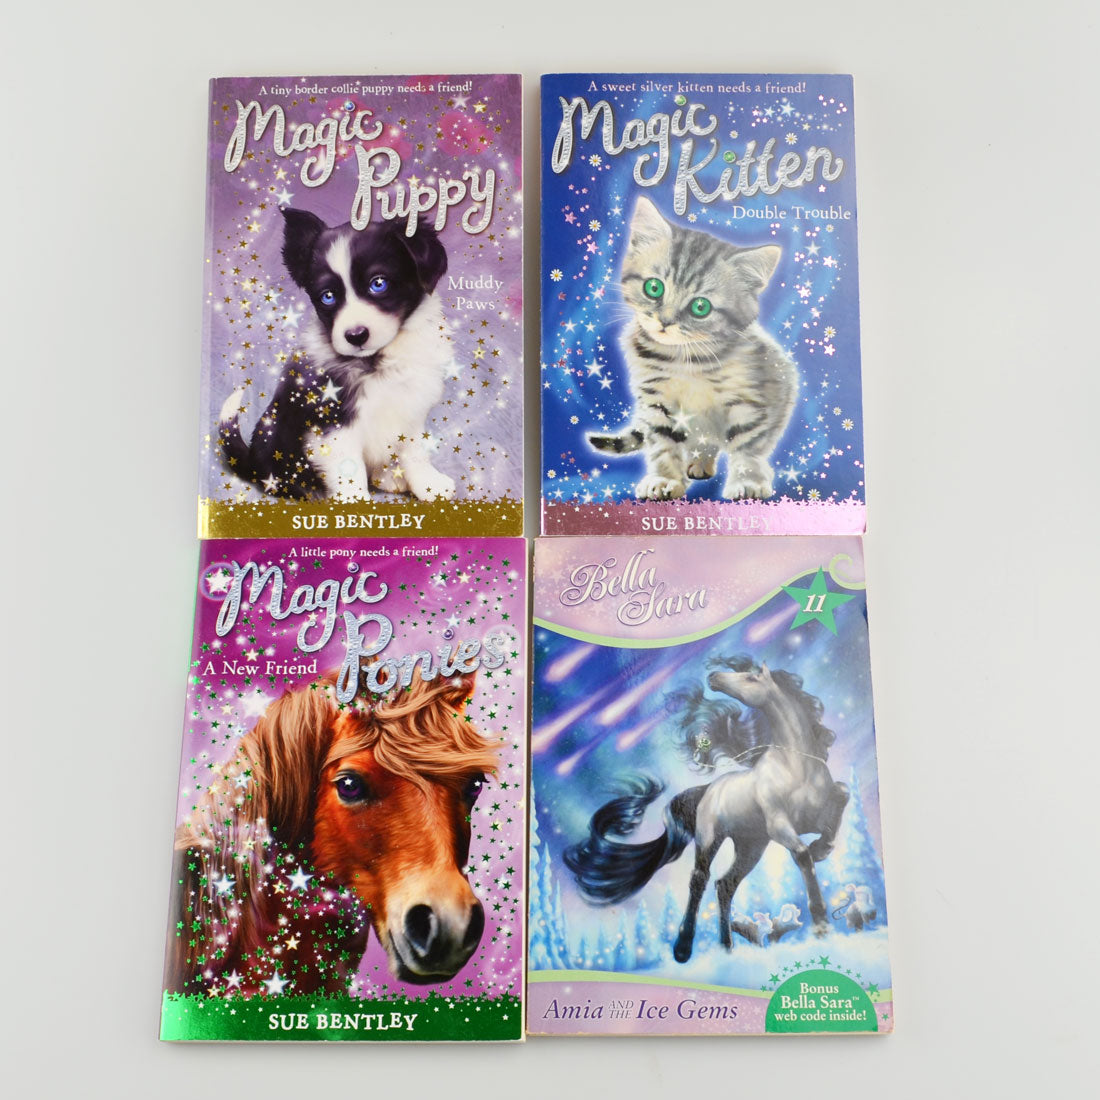 Lot of 4 Magic Books by Sue Bentley - Magic Kitten, Puppy, Ponies, and Bella Sara